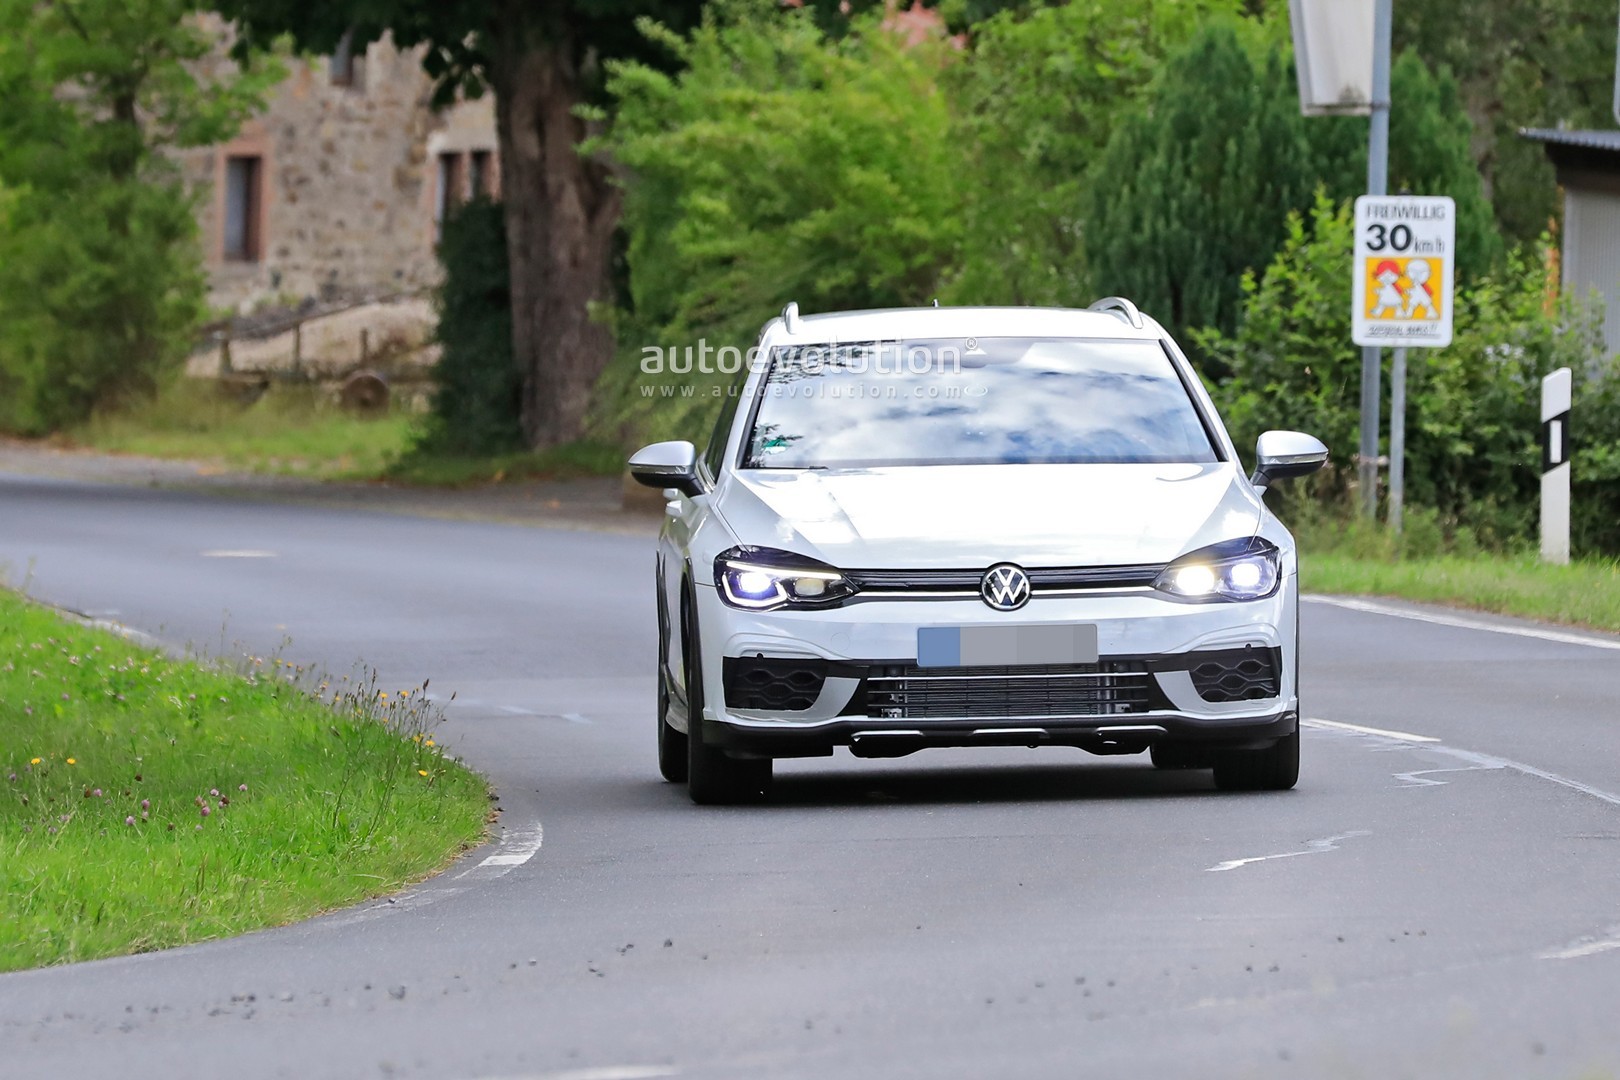 2020 - [Volkswagen] Golf VIII - Page 19 Volkswagen-making-a-golf-r-wagon-with-audi-s4-power-that-looks-line-an-alltrack_14